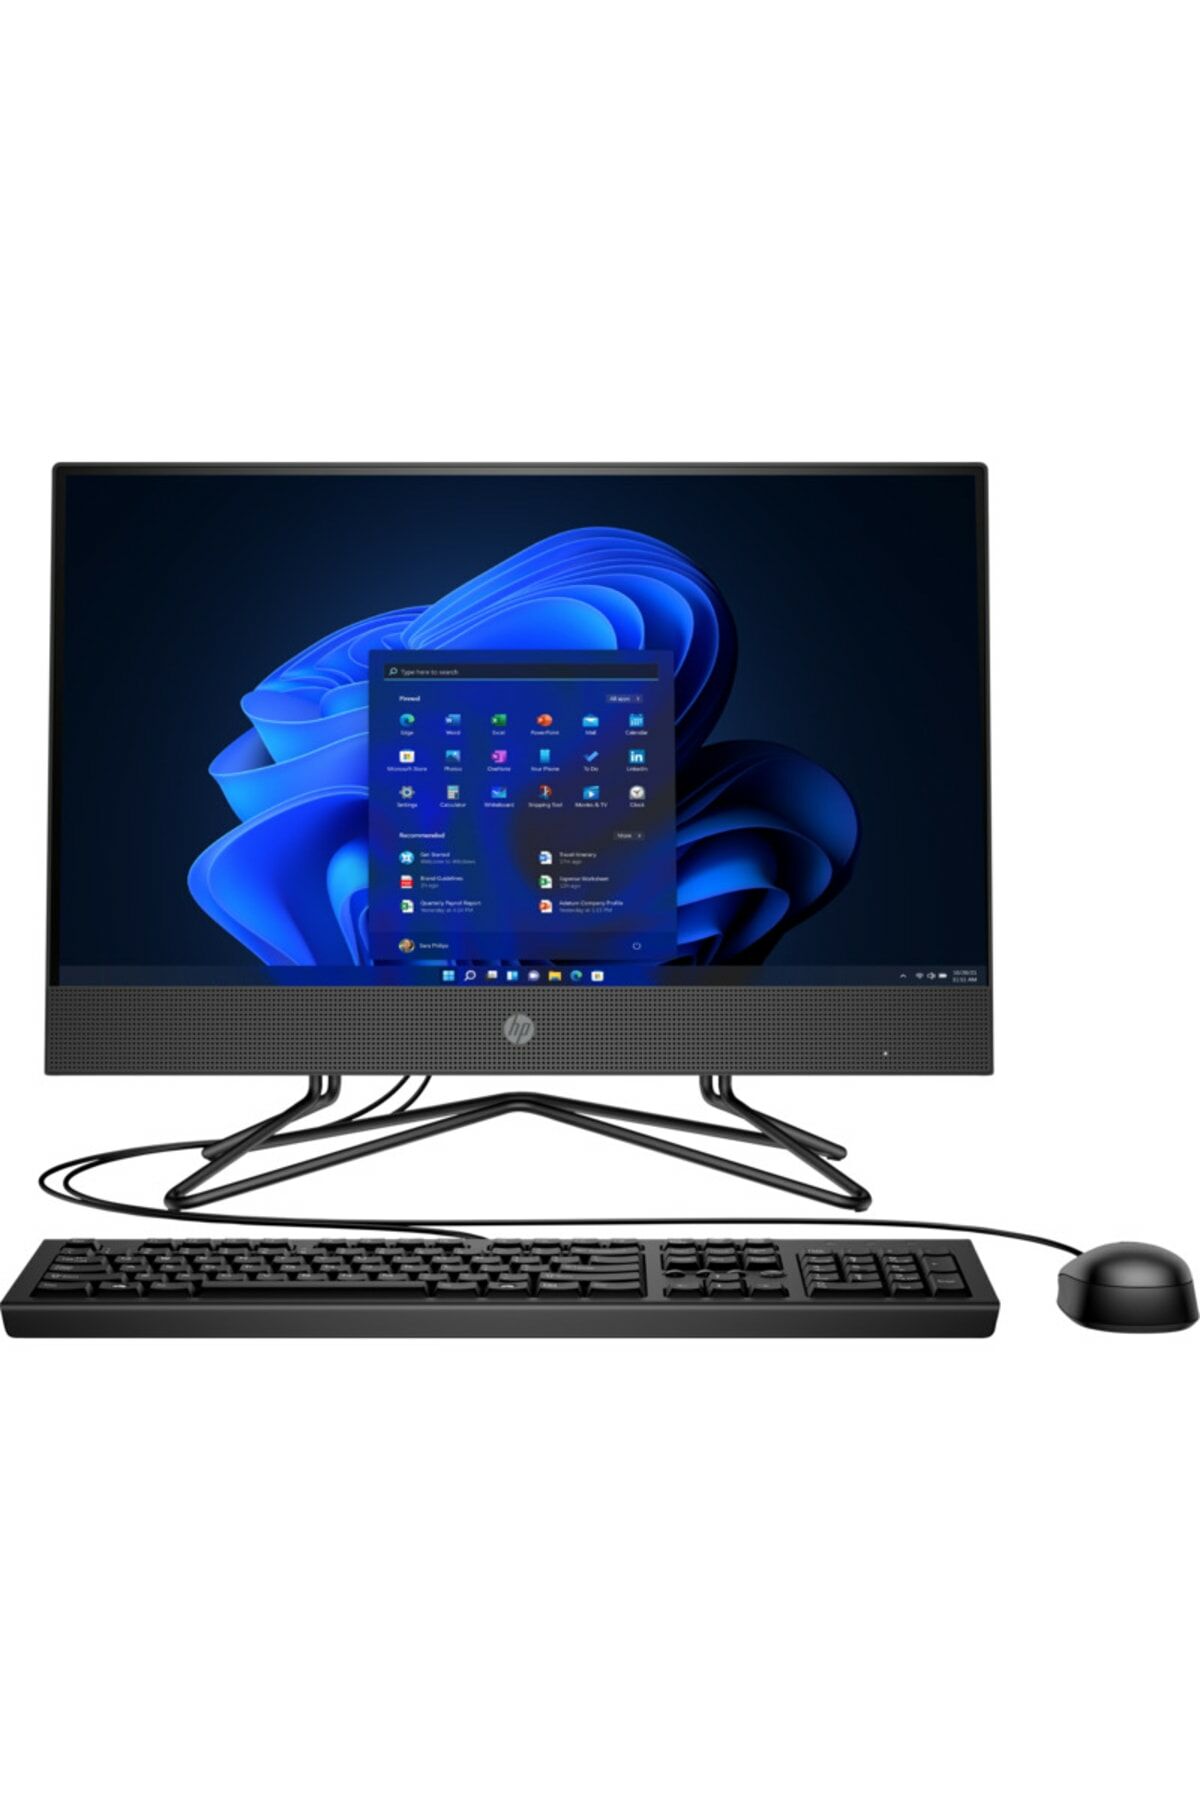 HP 200 G4 I3-10110u 8 Gb 512 Gb M.2 Fdos 295d4ea08 Uhd Graphics 21.5'' Fhd All In One Pc